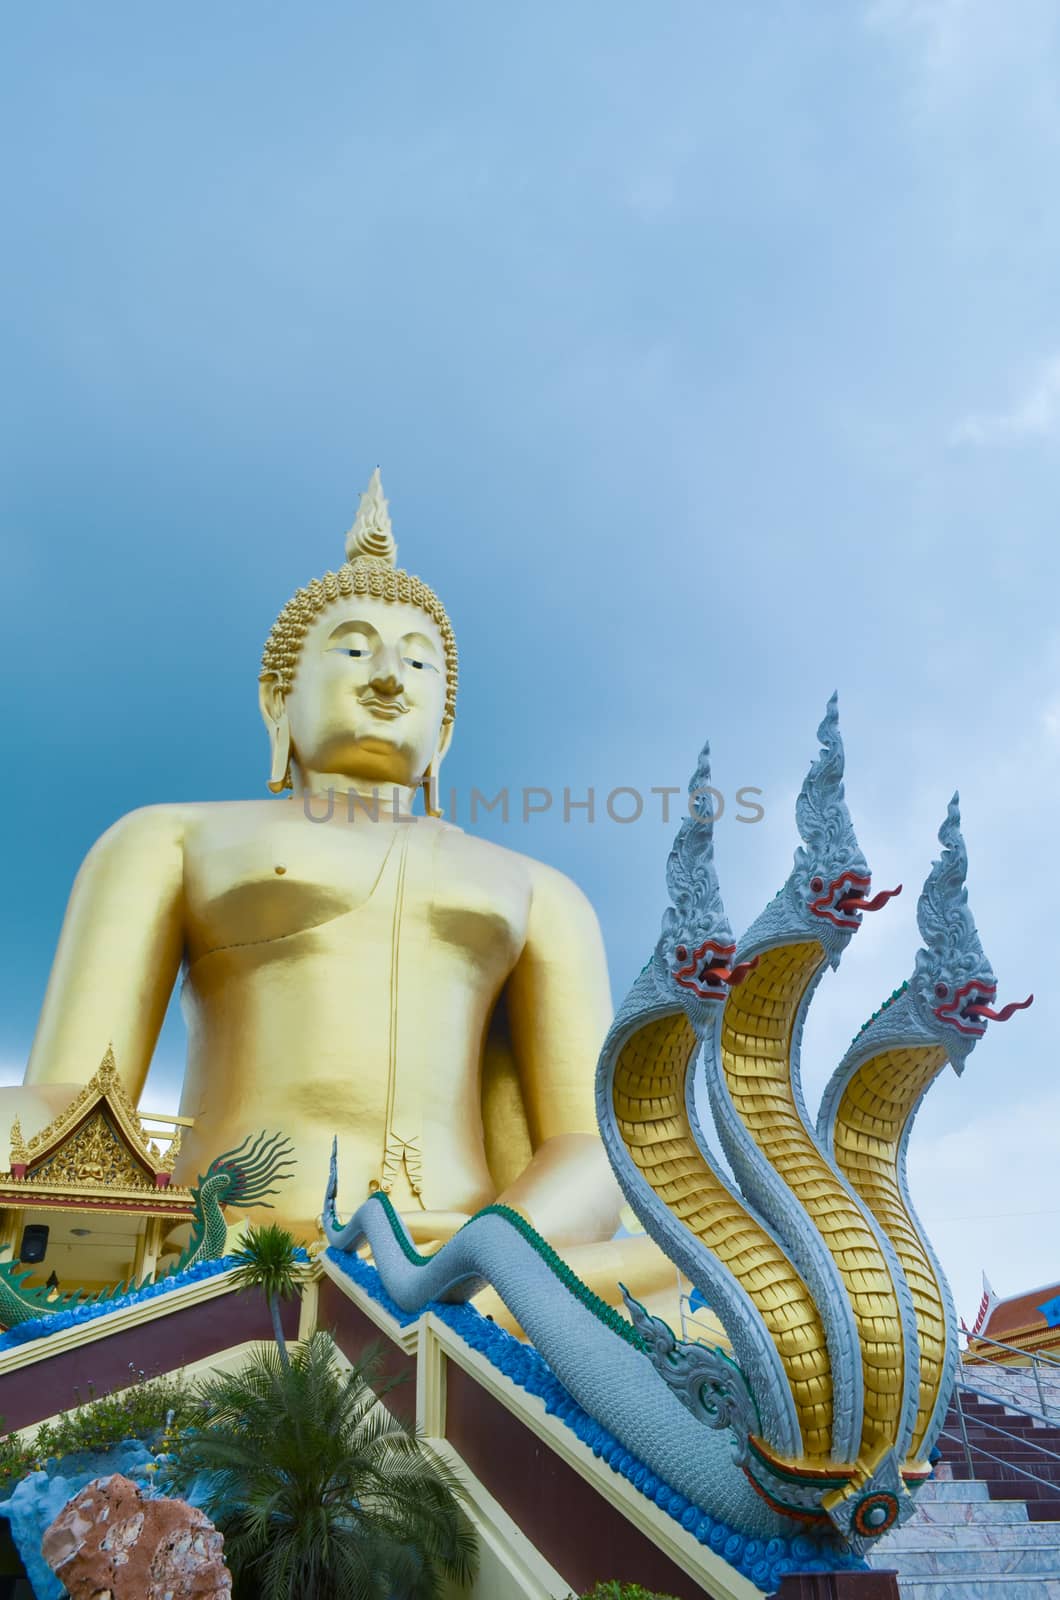 Temple is Ang Thong city and have big Buddha statue in Thailand.